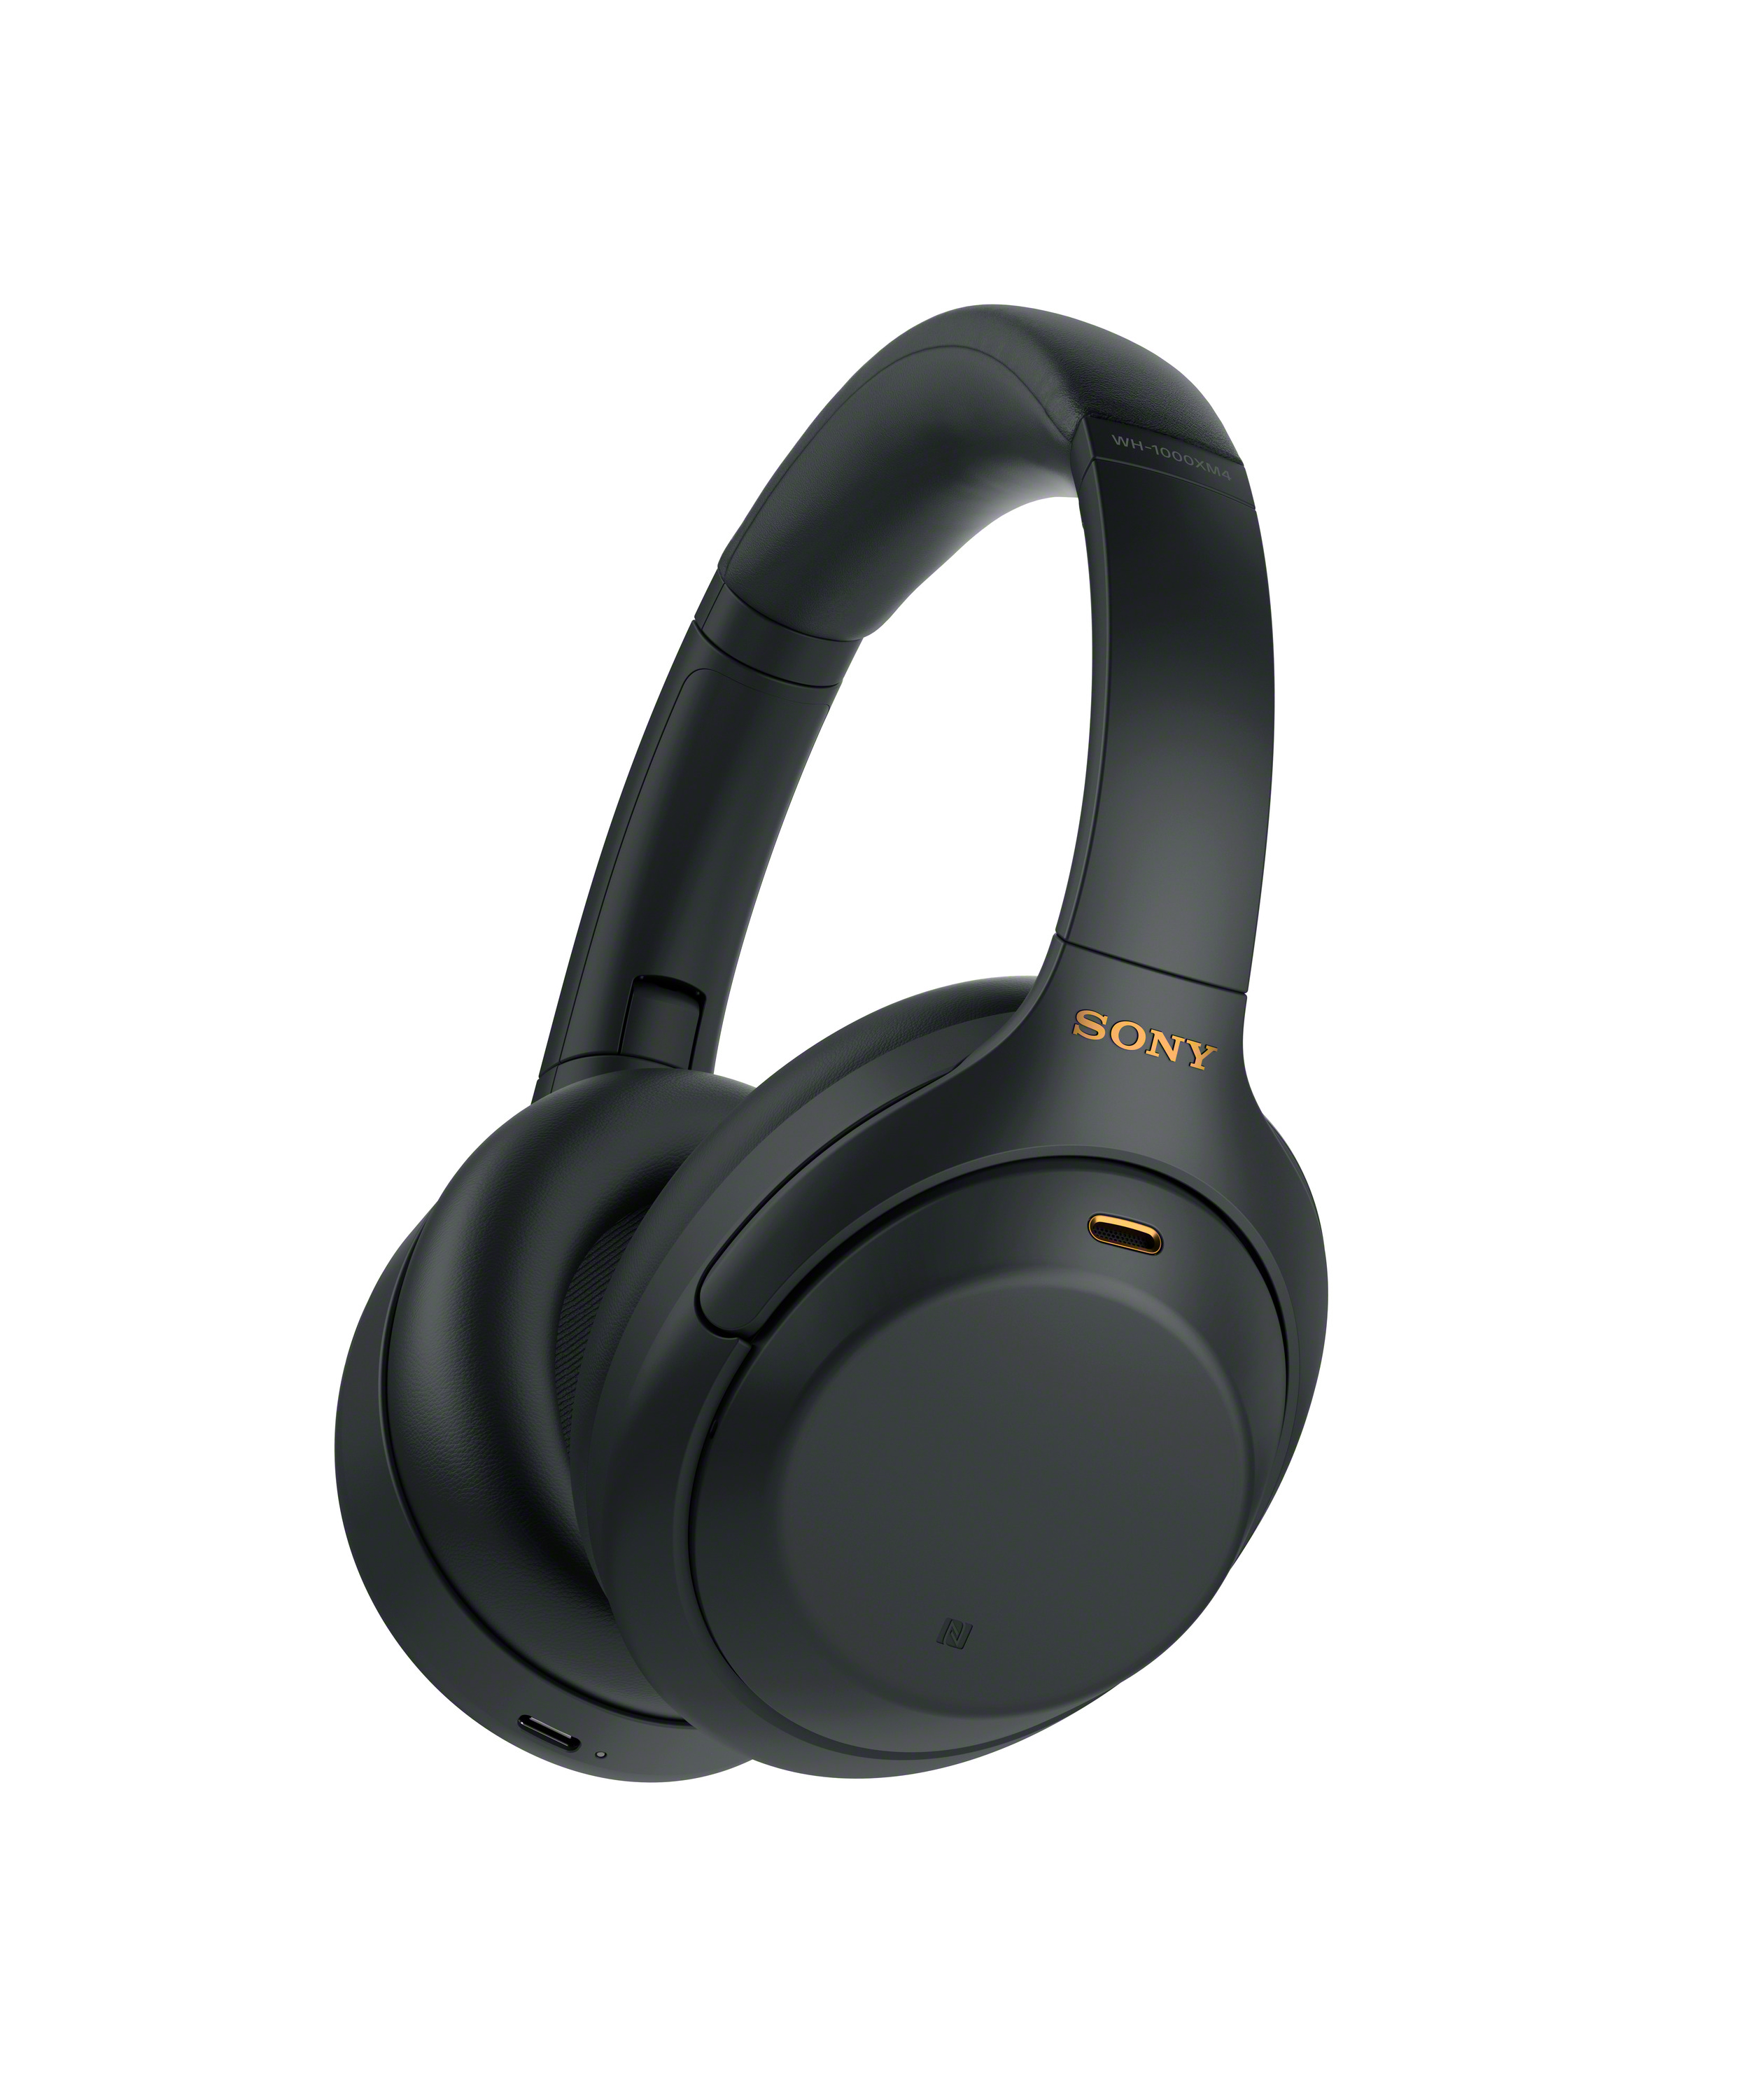 Sony Wireless Headphones with Microphone | Black | WH-CH520/B